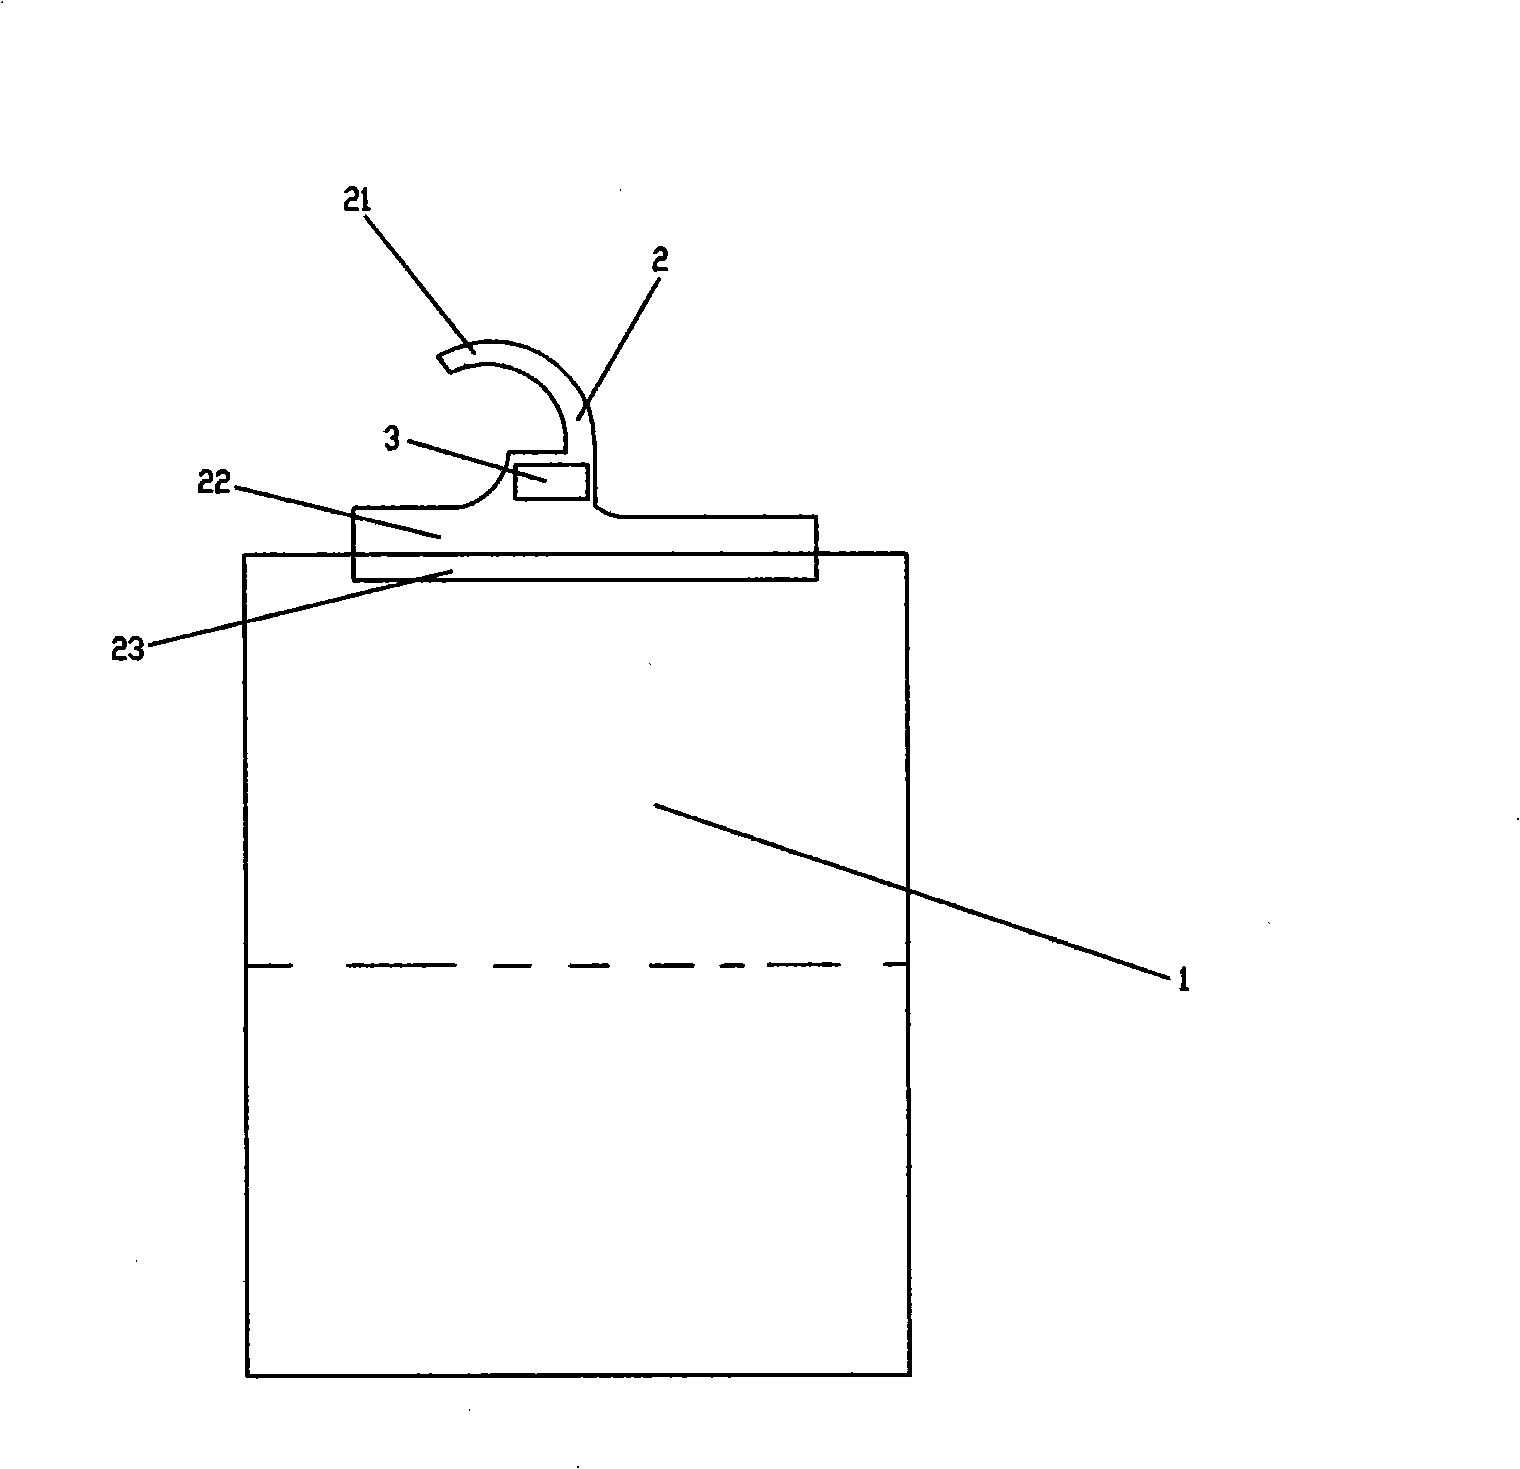 Commercial product hanger with radio frequency electric label